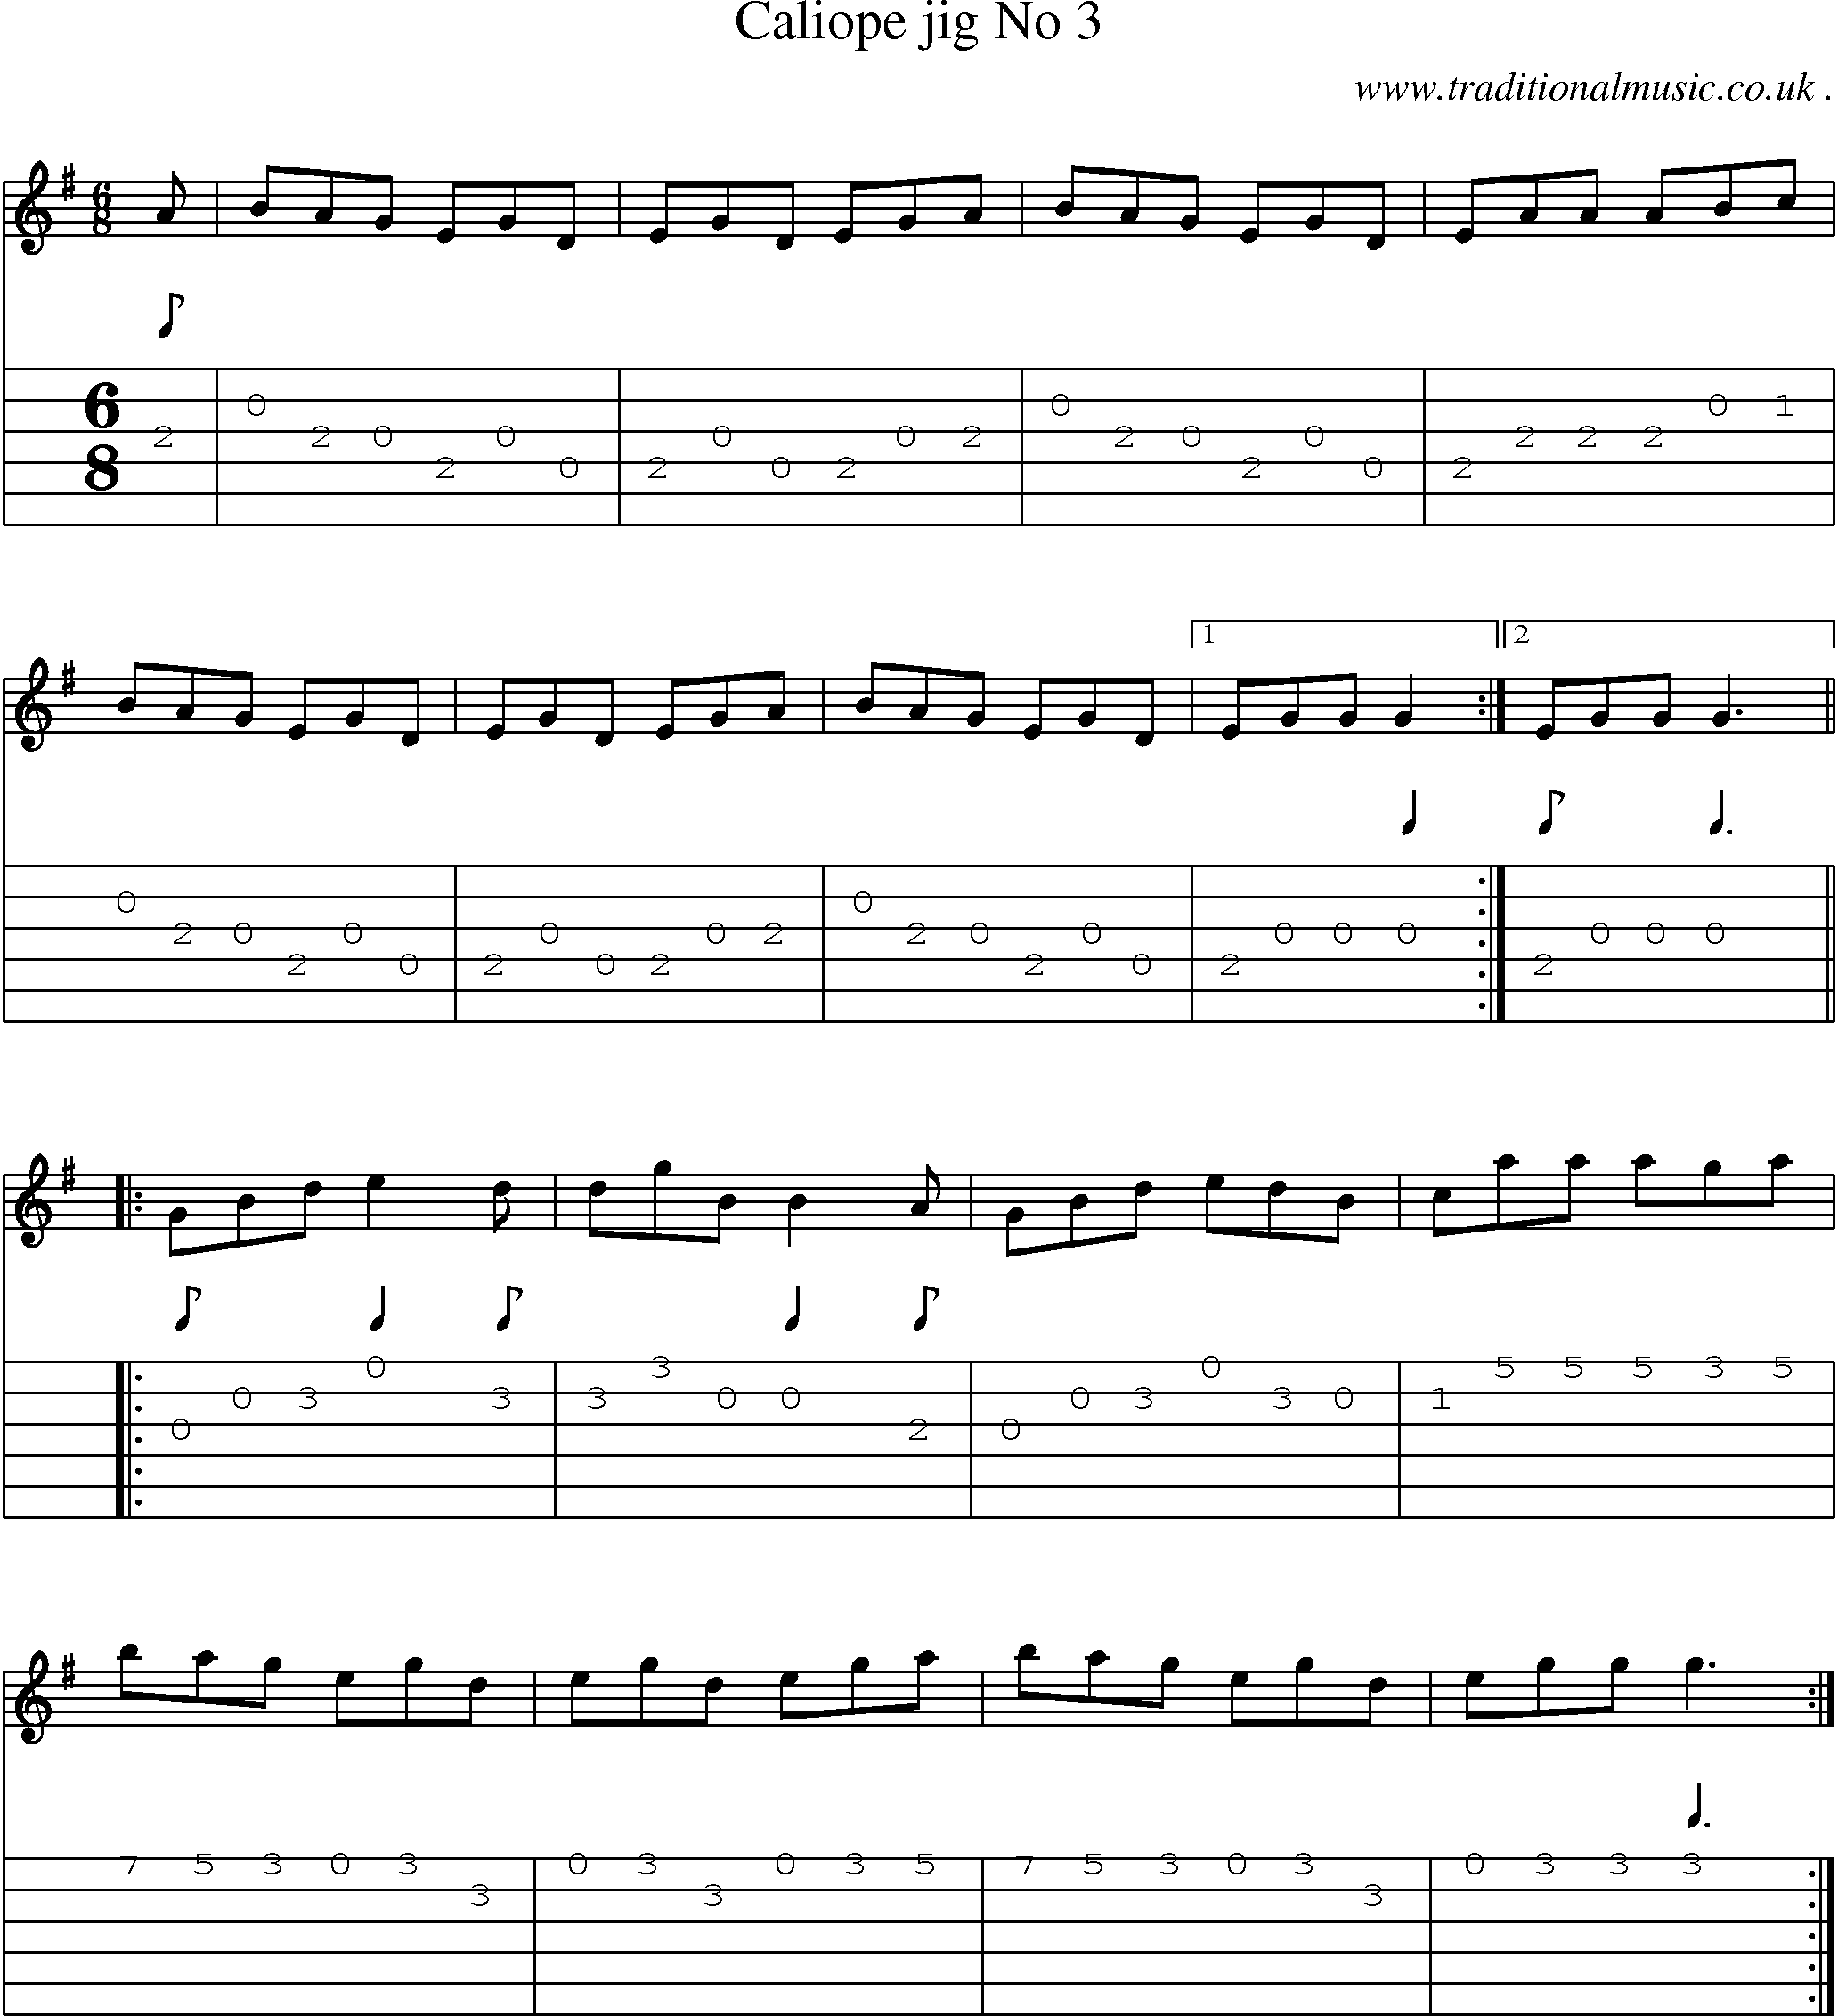 Sheet-Music and Guitar Tabs for Caliope Jig No 3